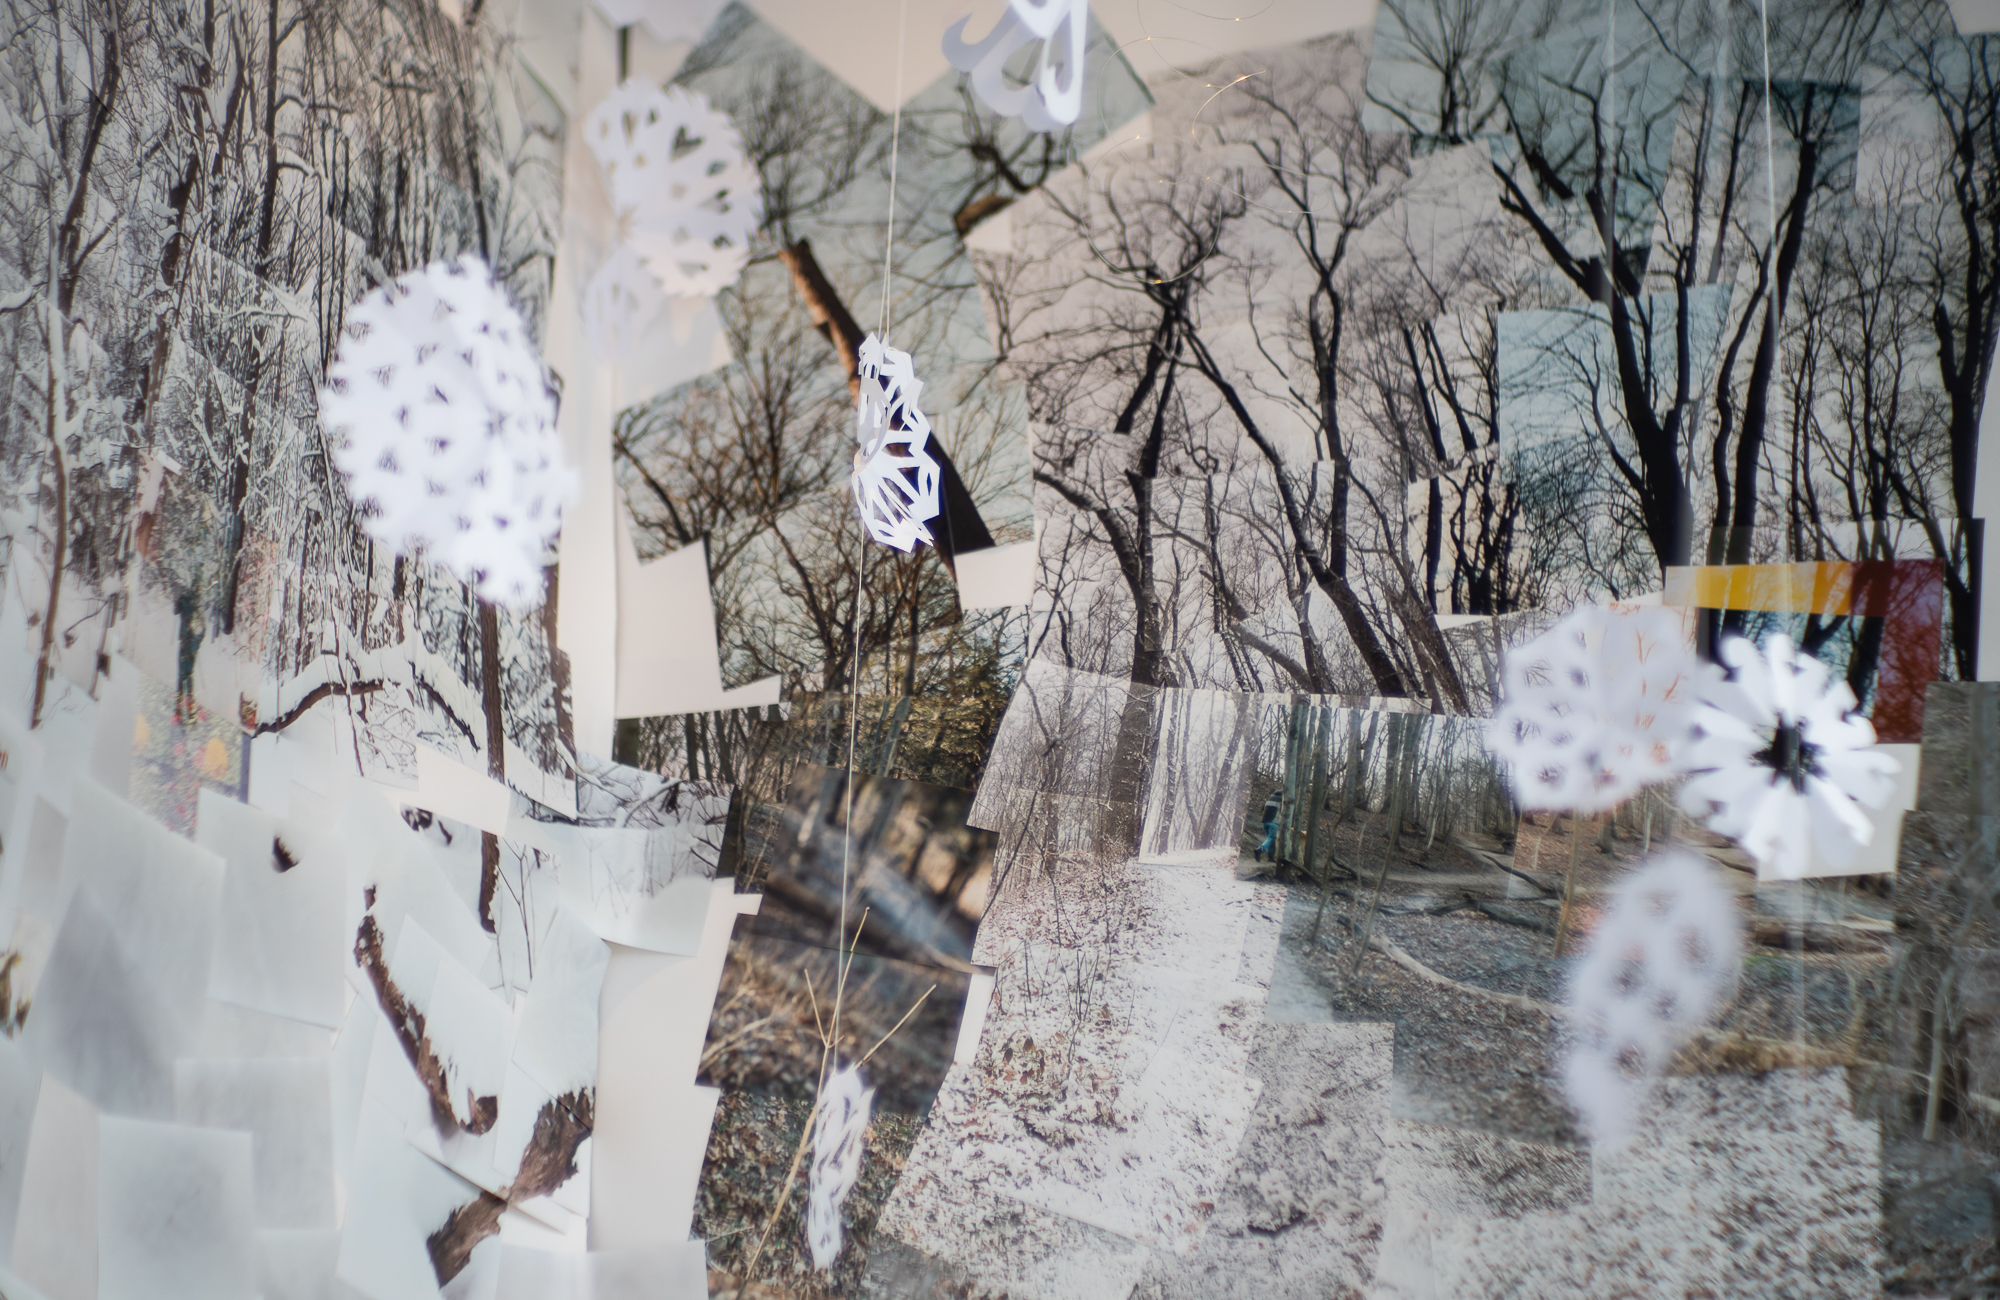 Photo of an interior window display with collaged images of trees and a winter walking path, plus paper snowflakes hanging by strings.